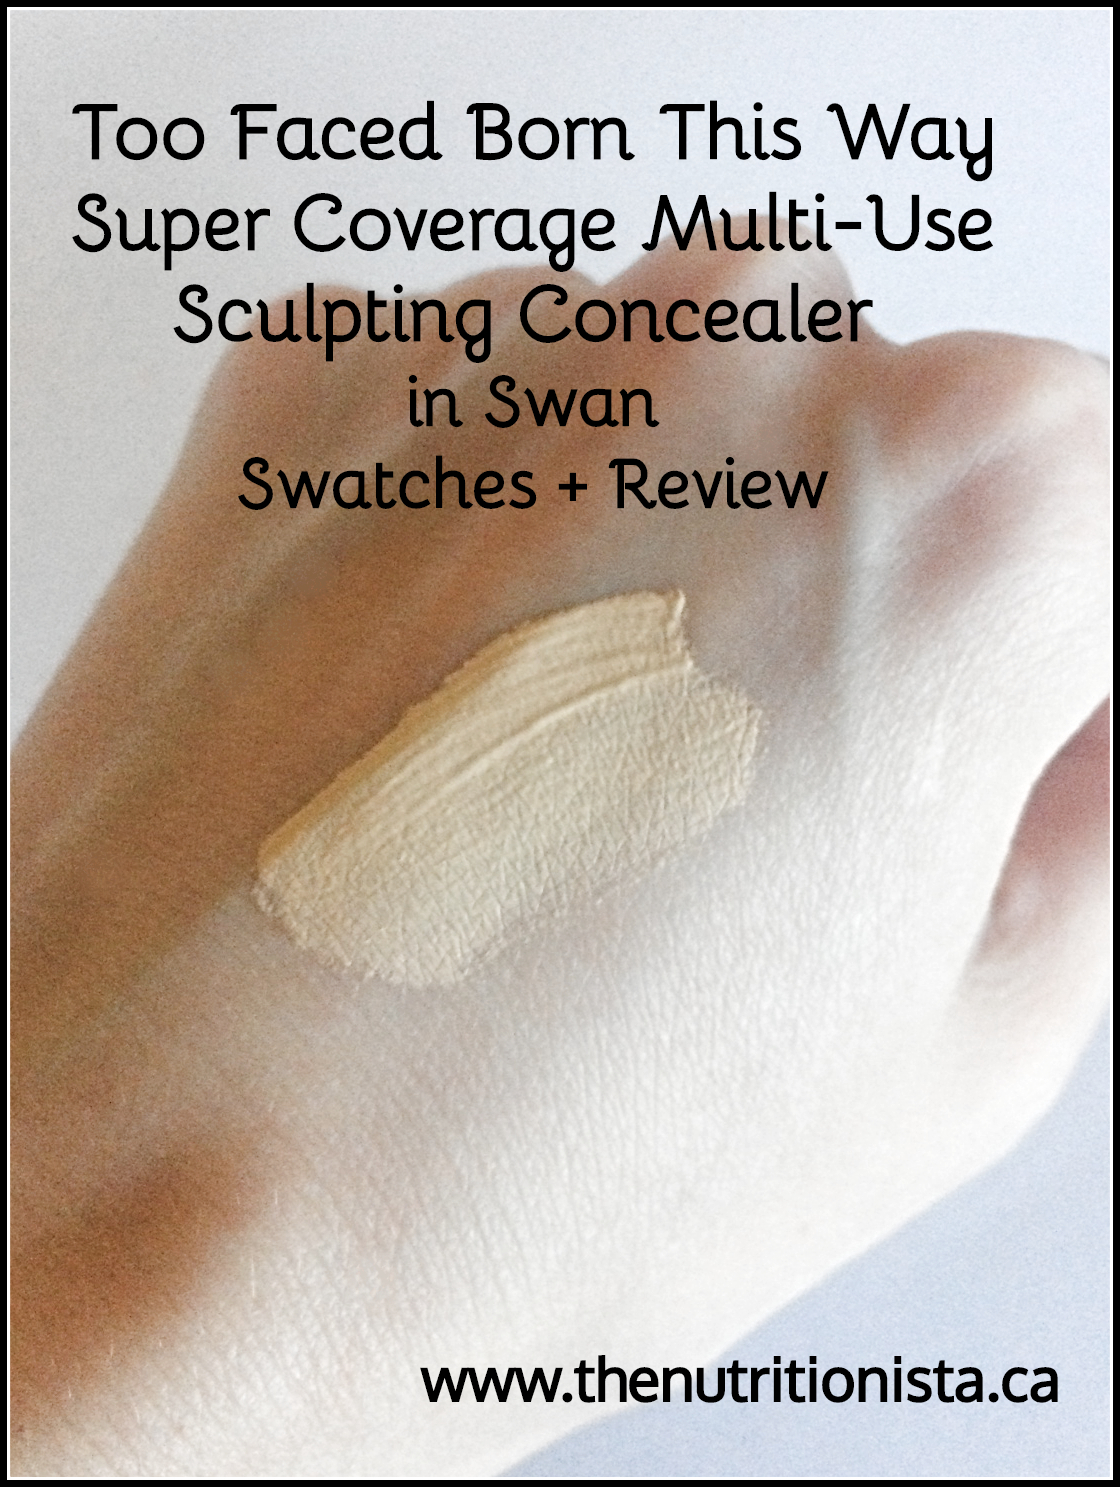 Too Faced Born This Way Super Coverage Multi-Use Sculpting Concealer Review  - Nutritionista